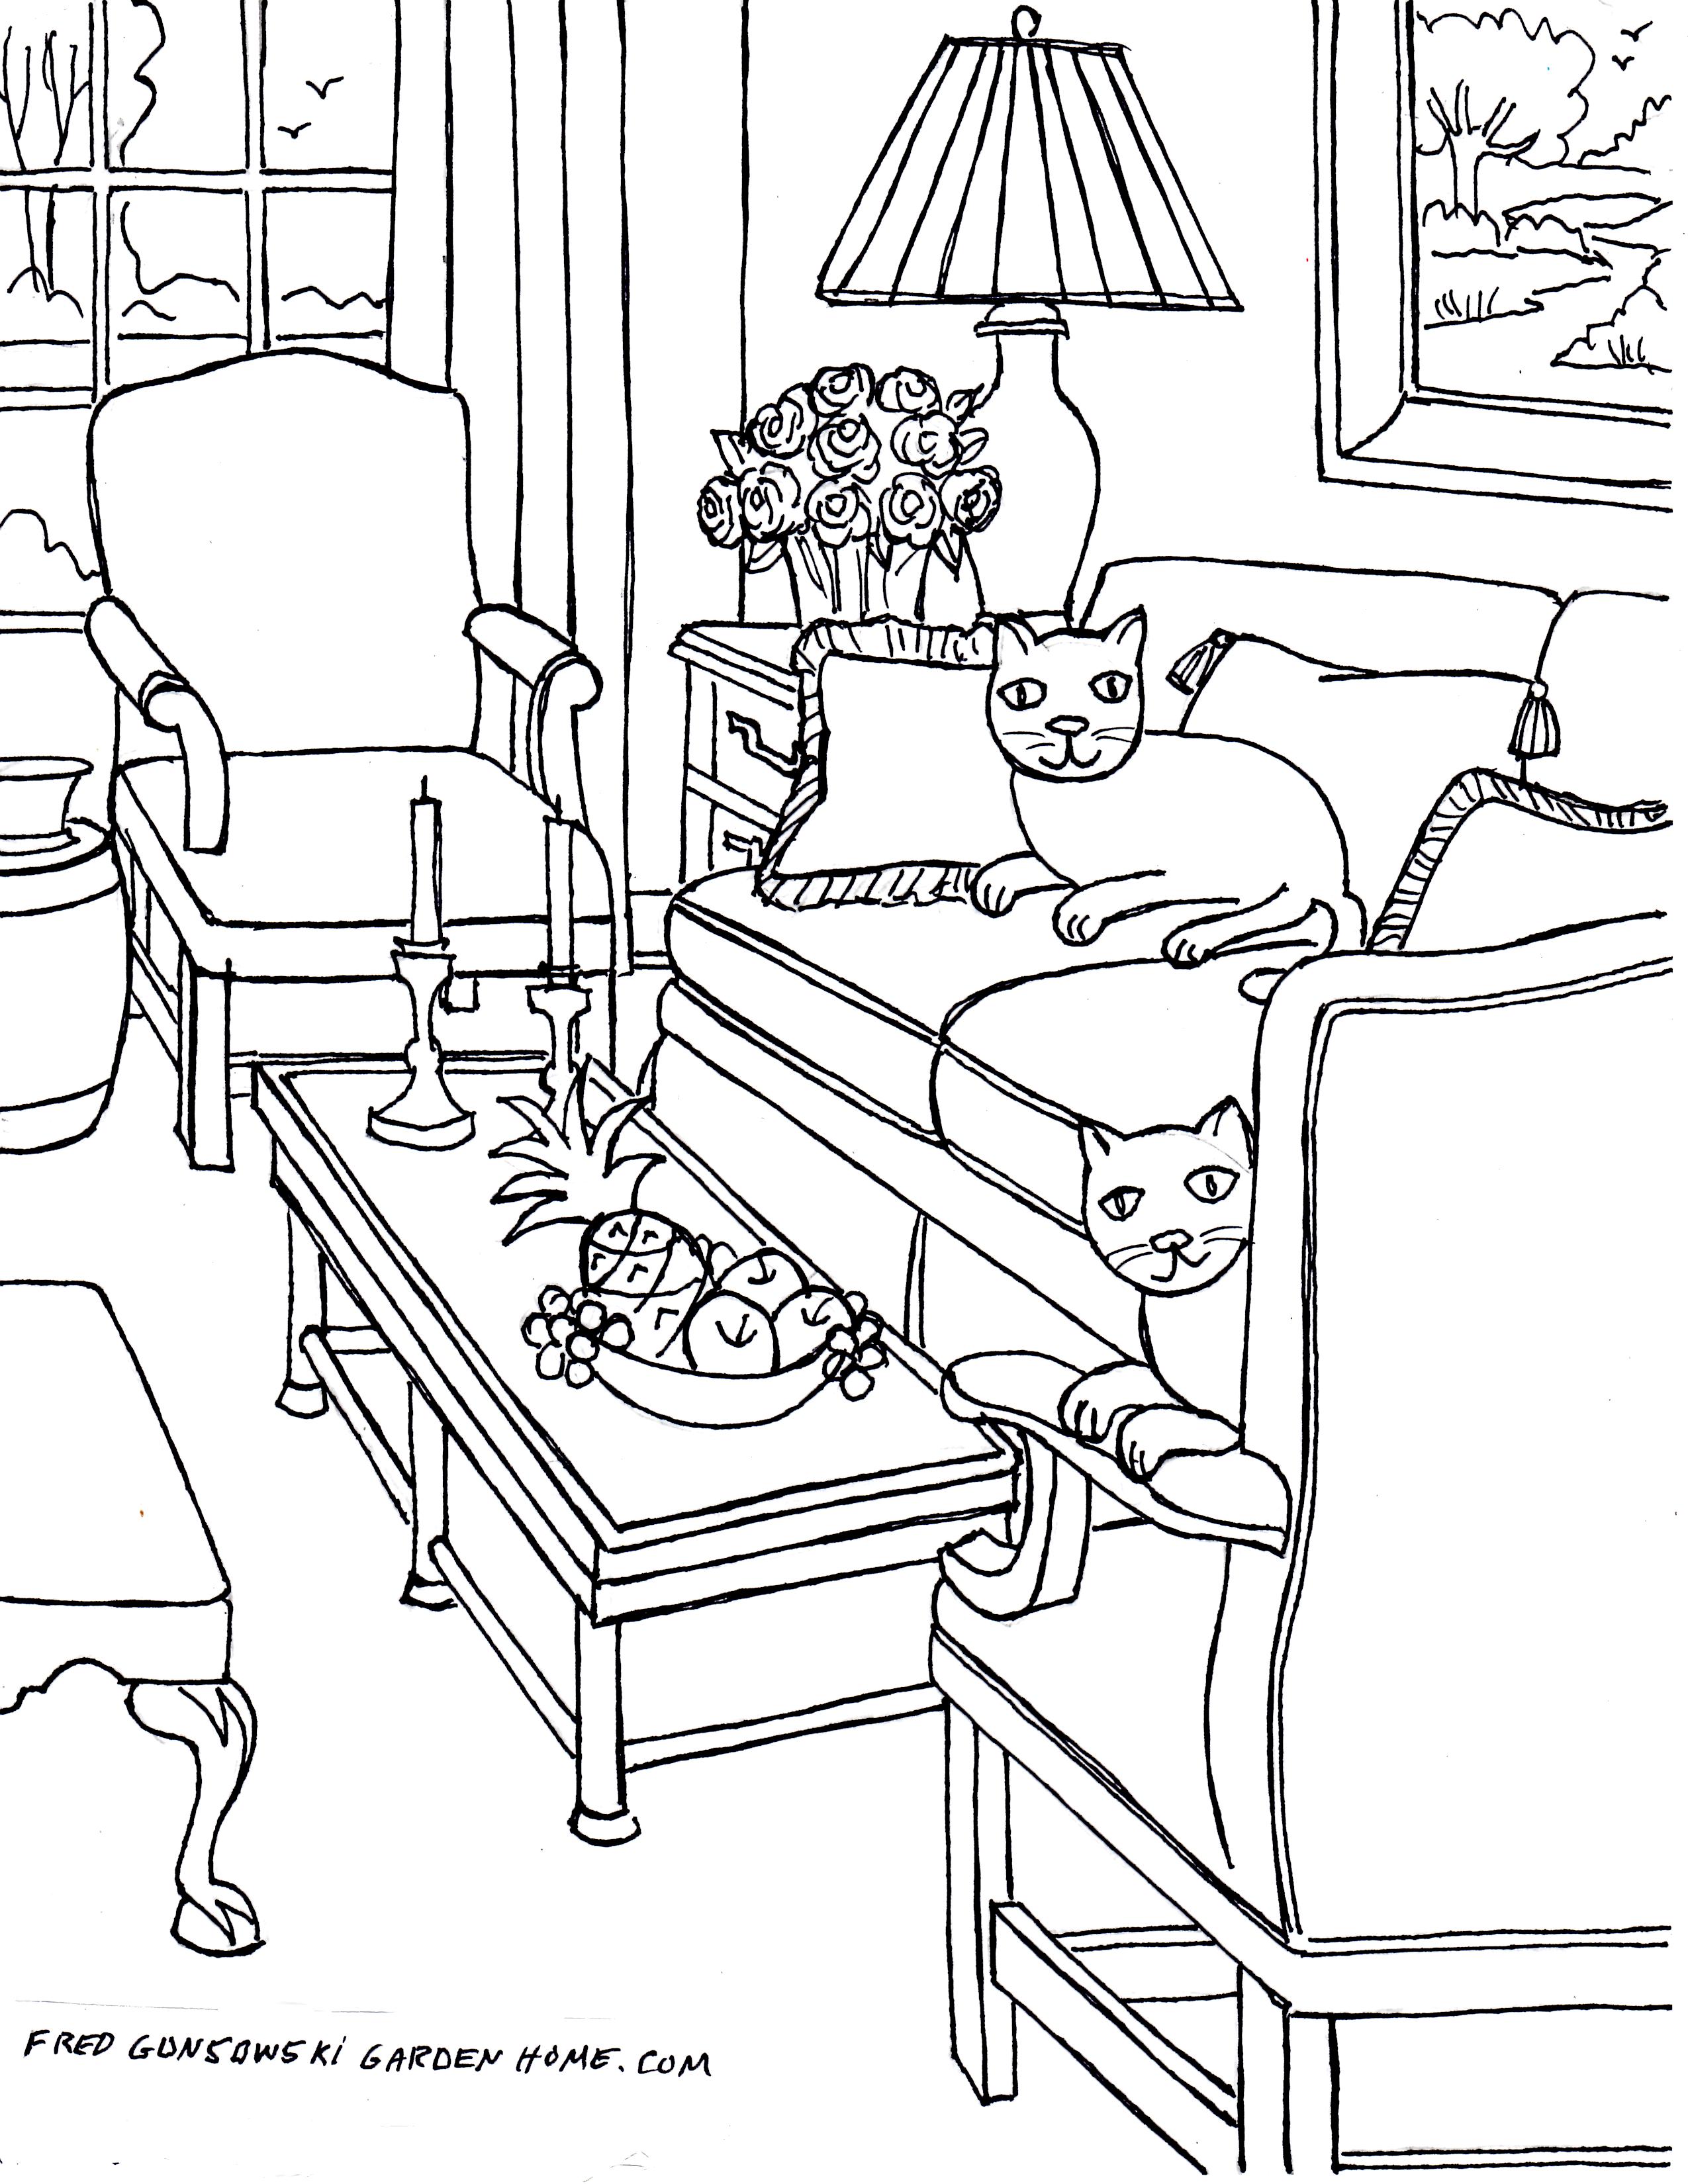 coloring-page-house-interior-coloring-picture-house-interior-house